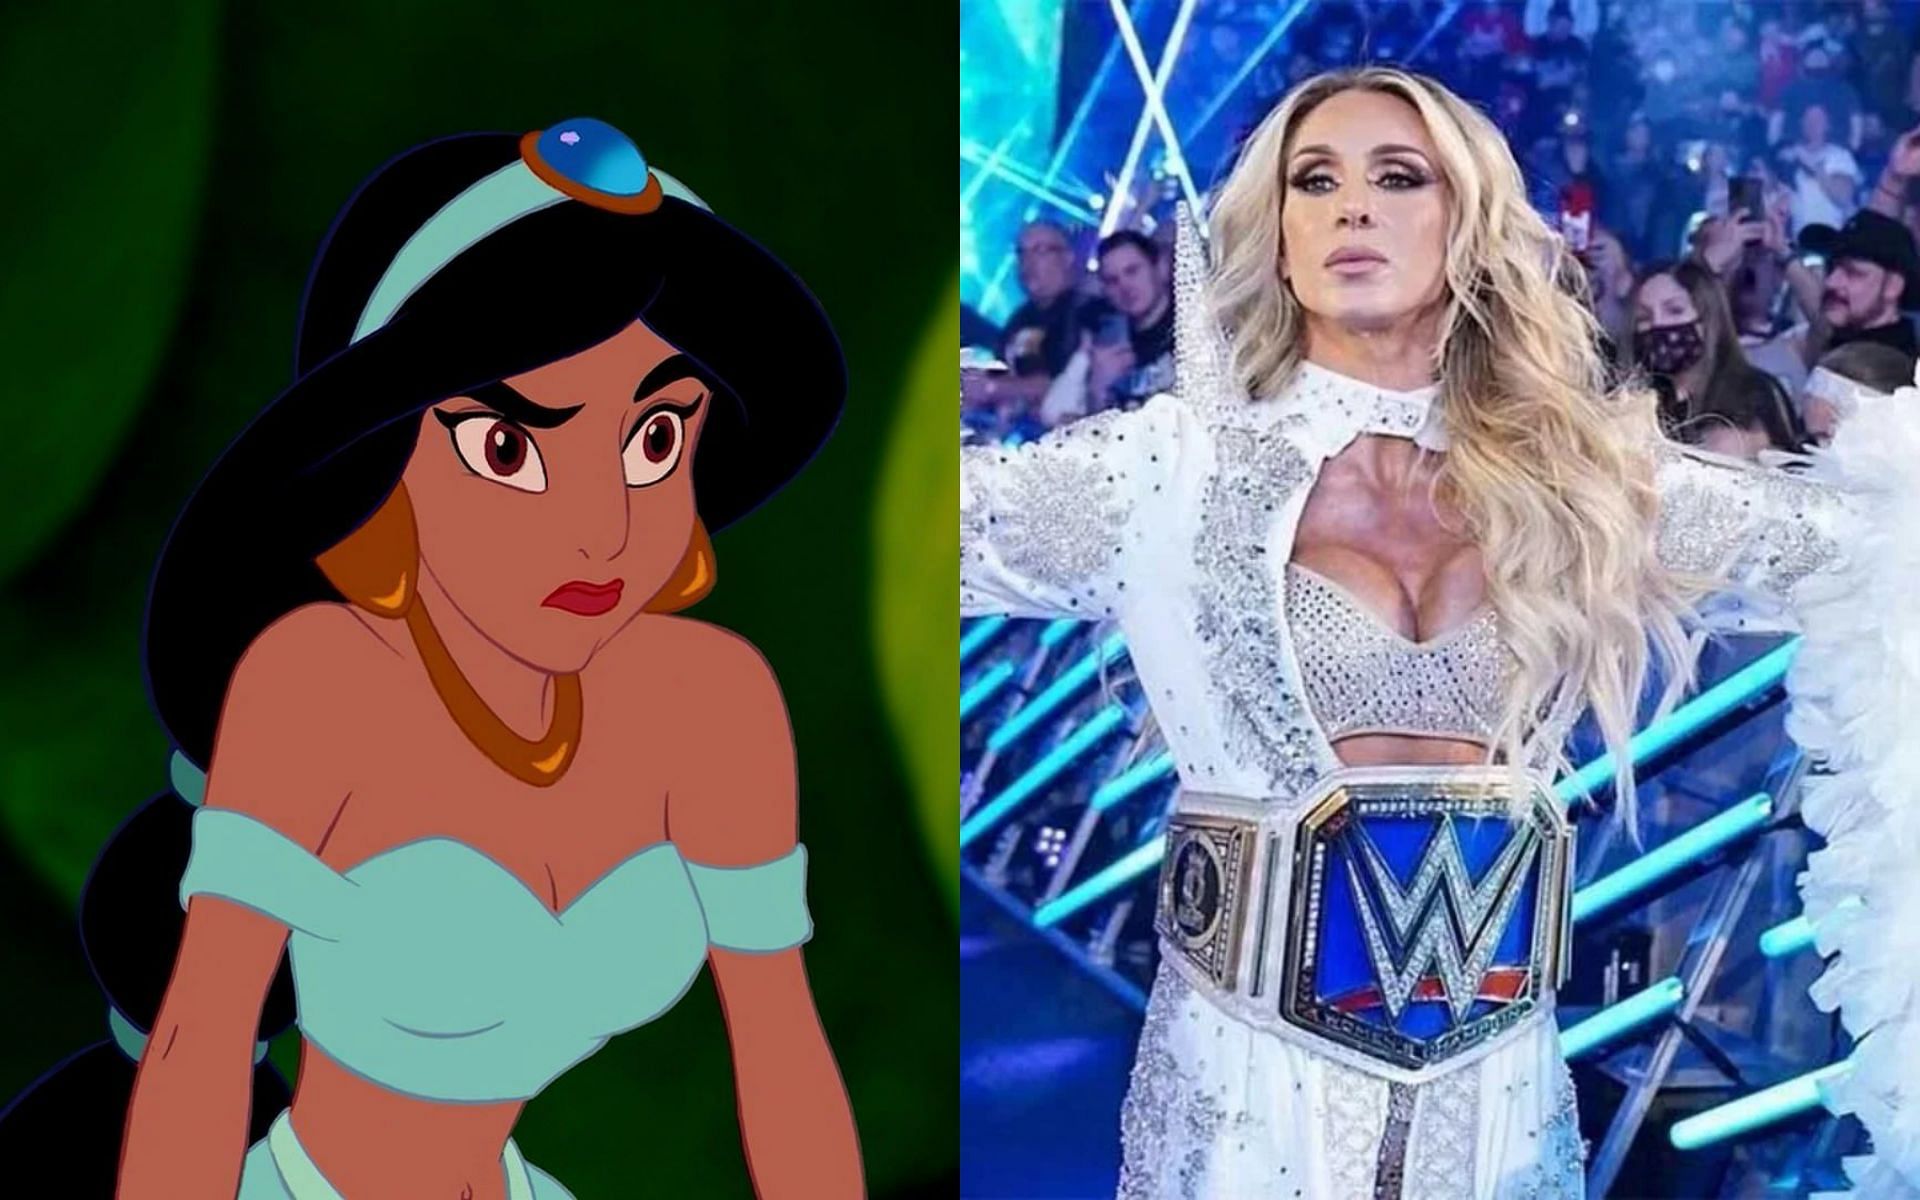 Jasmine and Charlotte Flair both broke away from just being a &quot;princess.&quot;